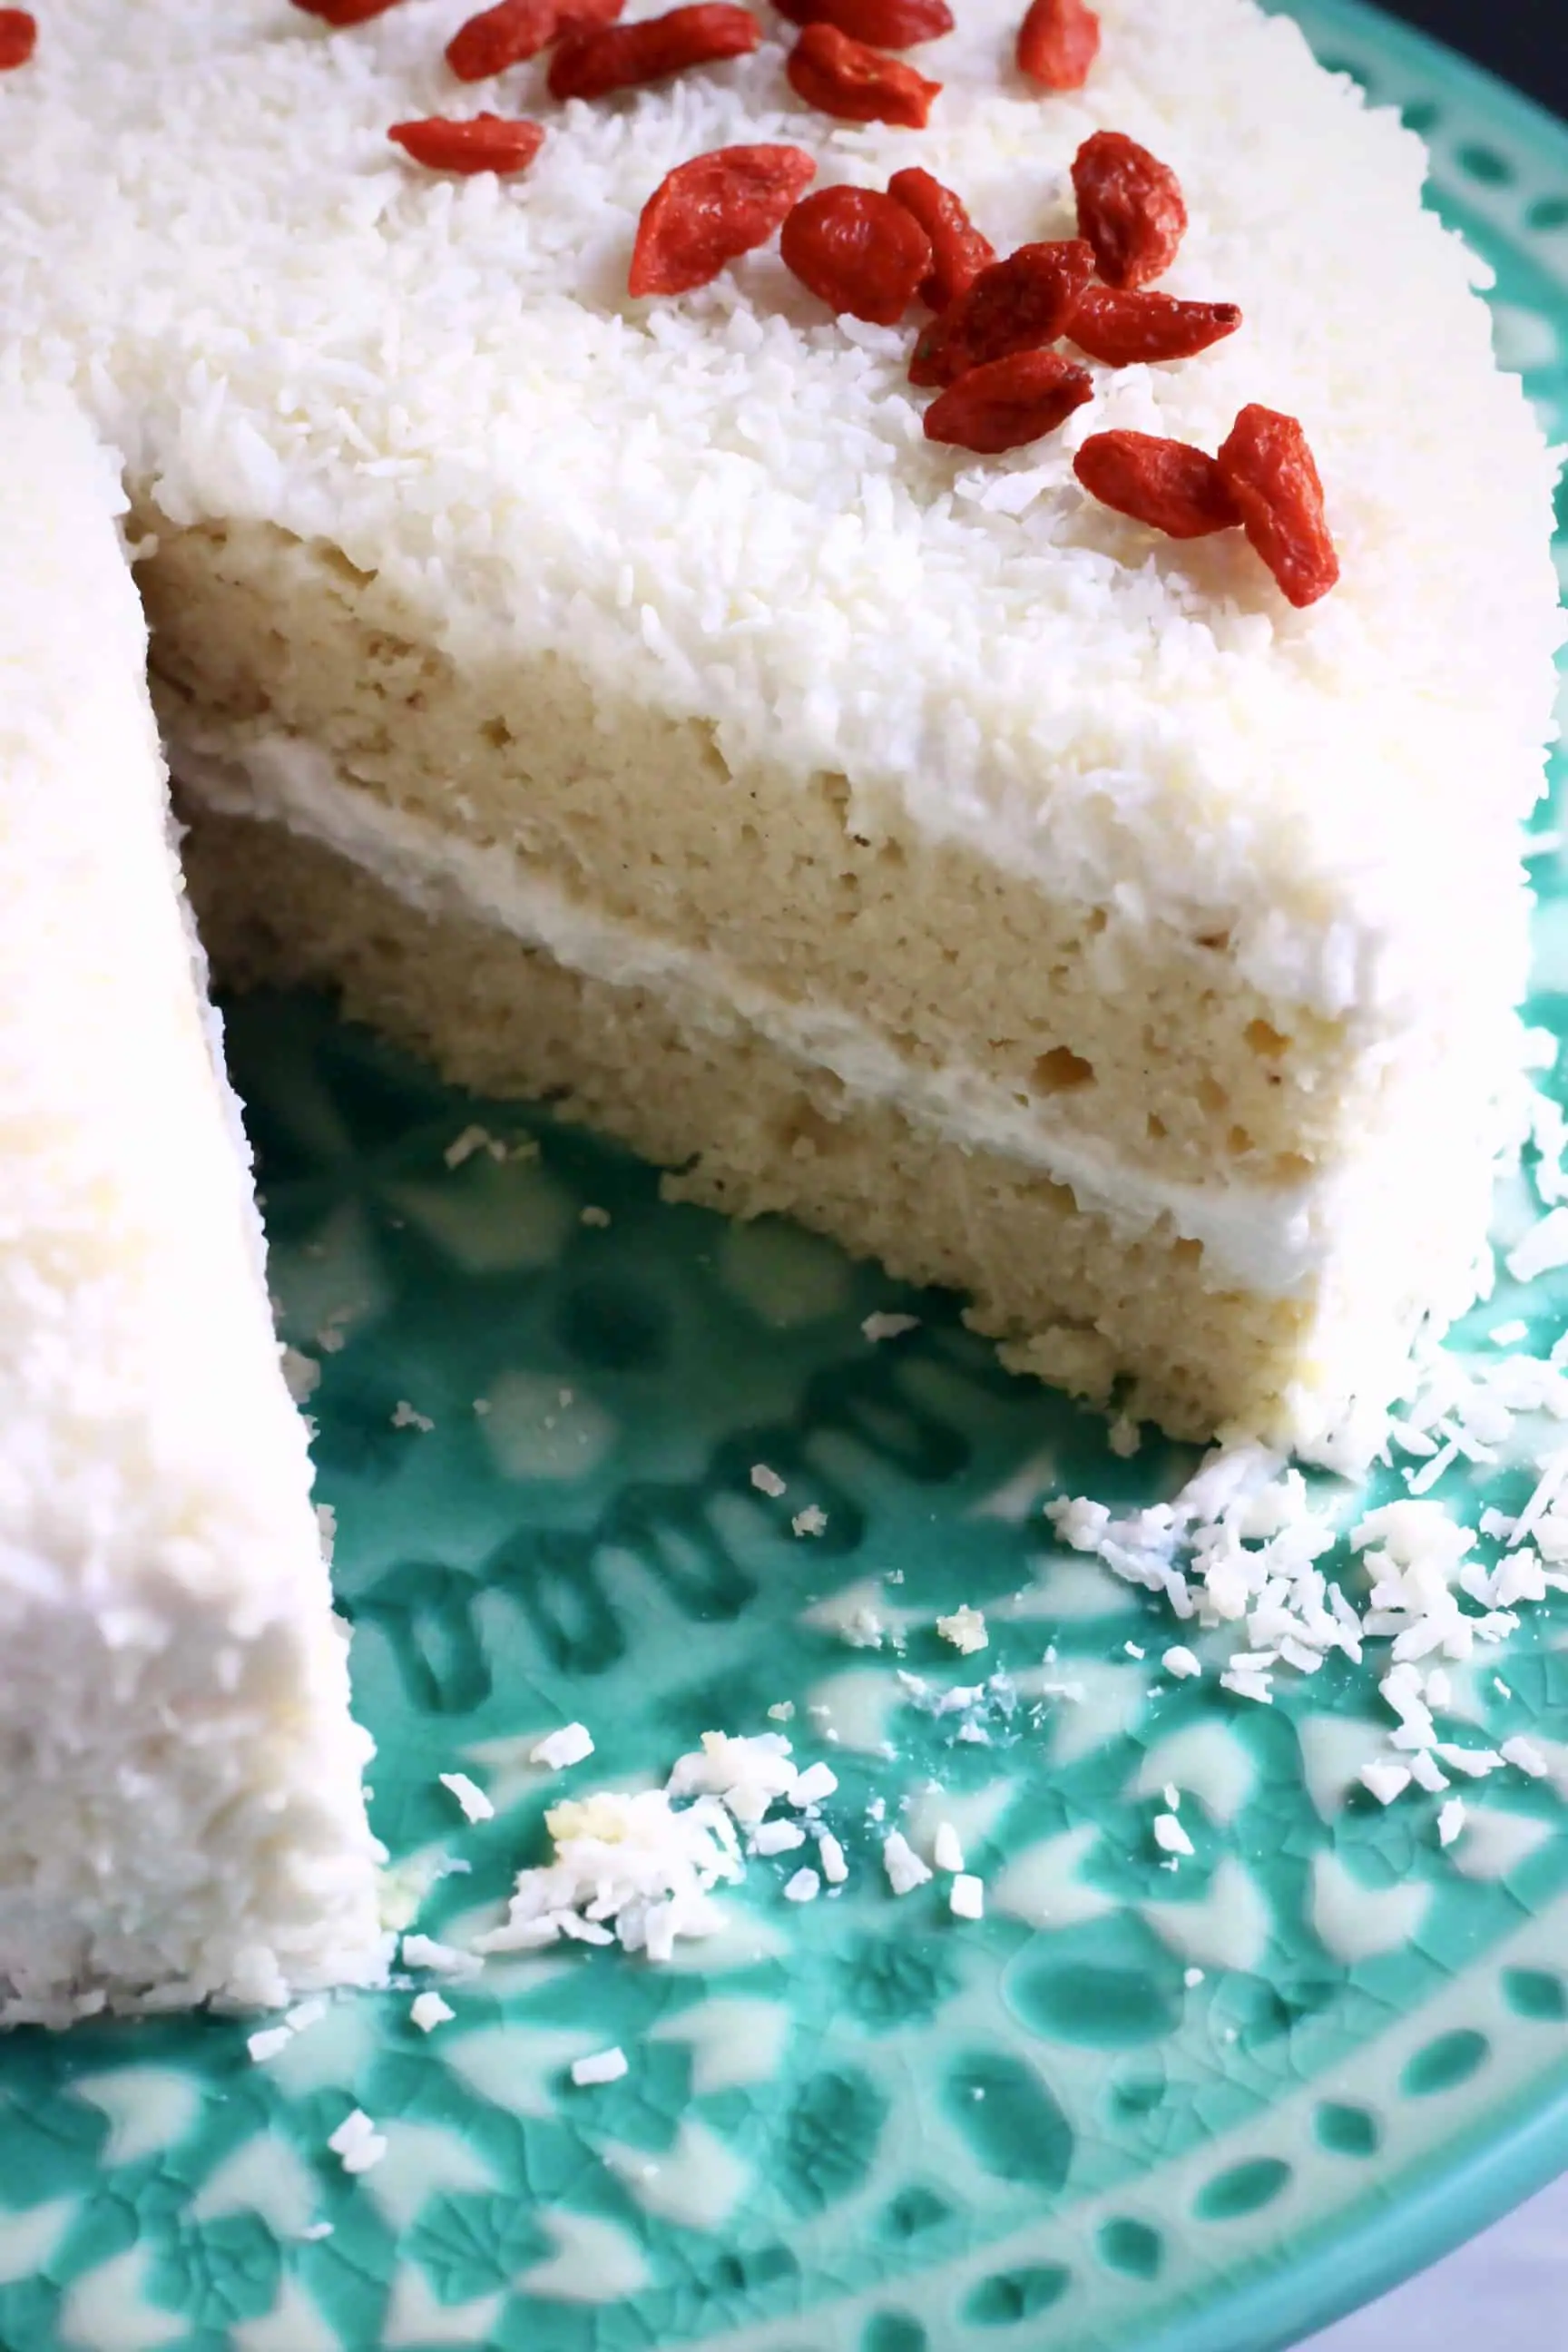 A sliced gluten-free vegan coconut sponge cake topped with desiccated coconut and red goji berries